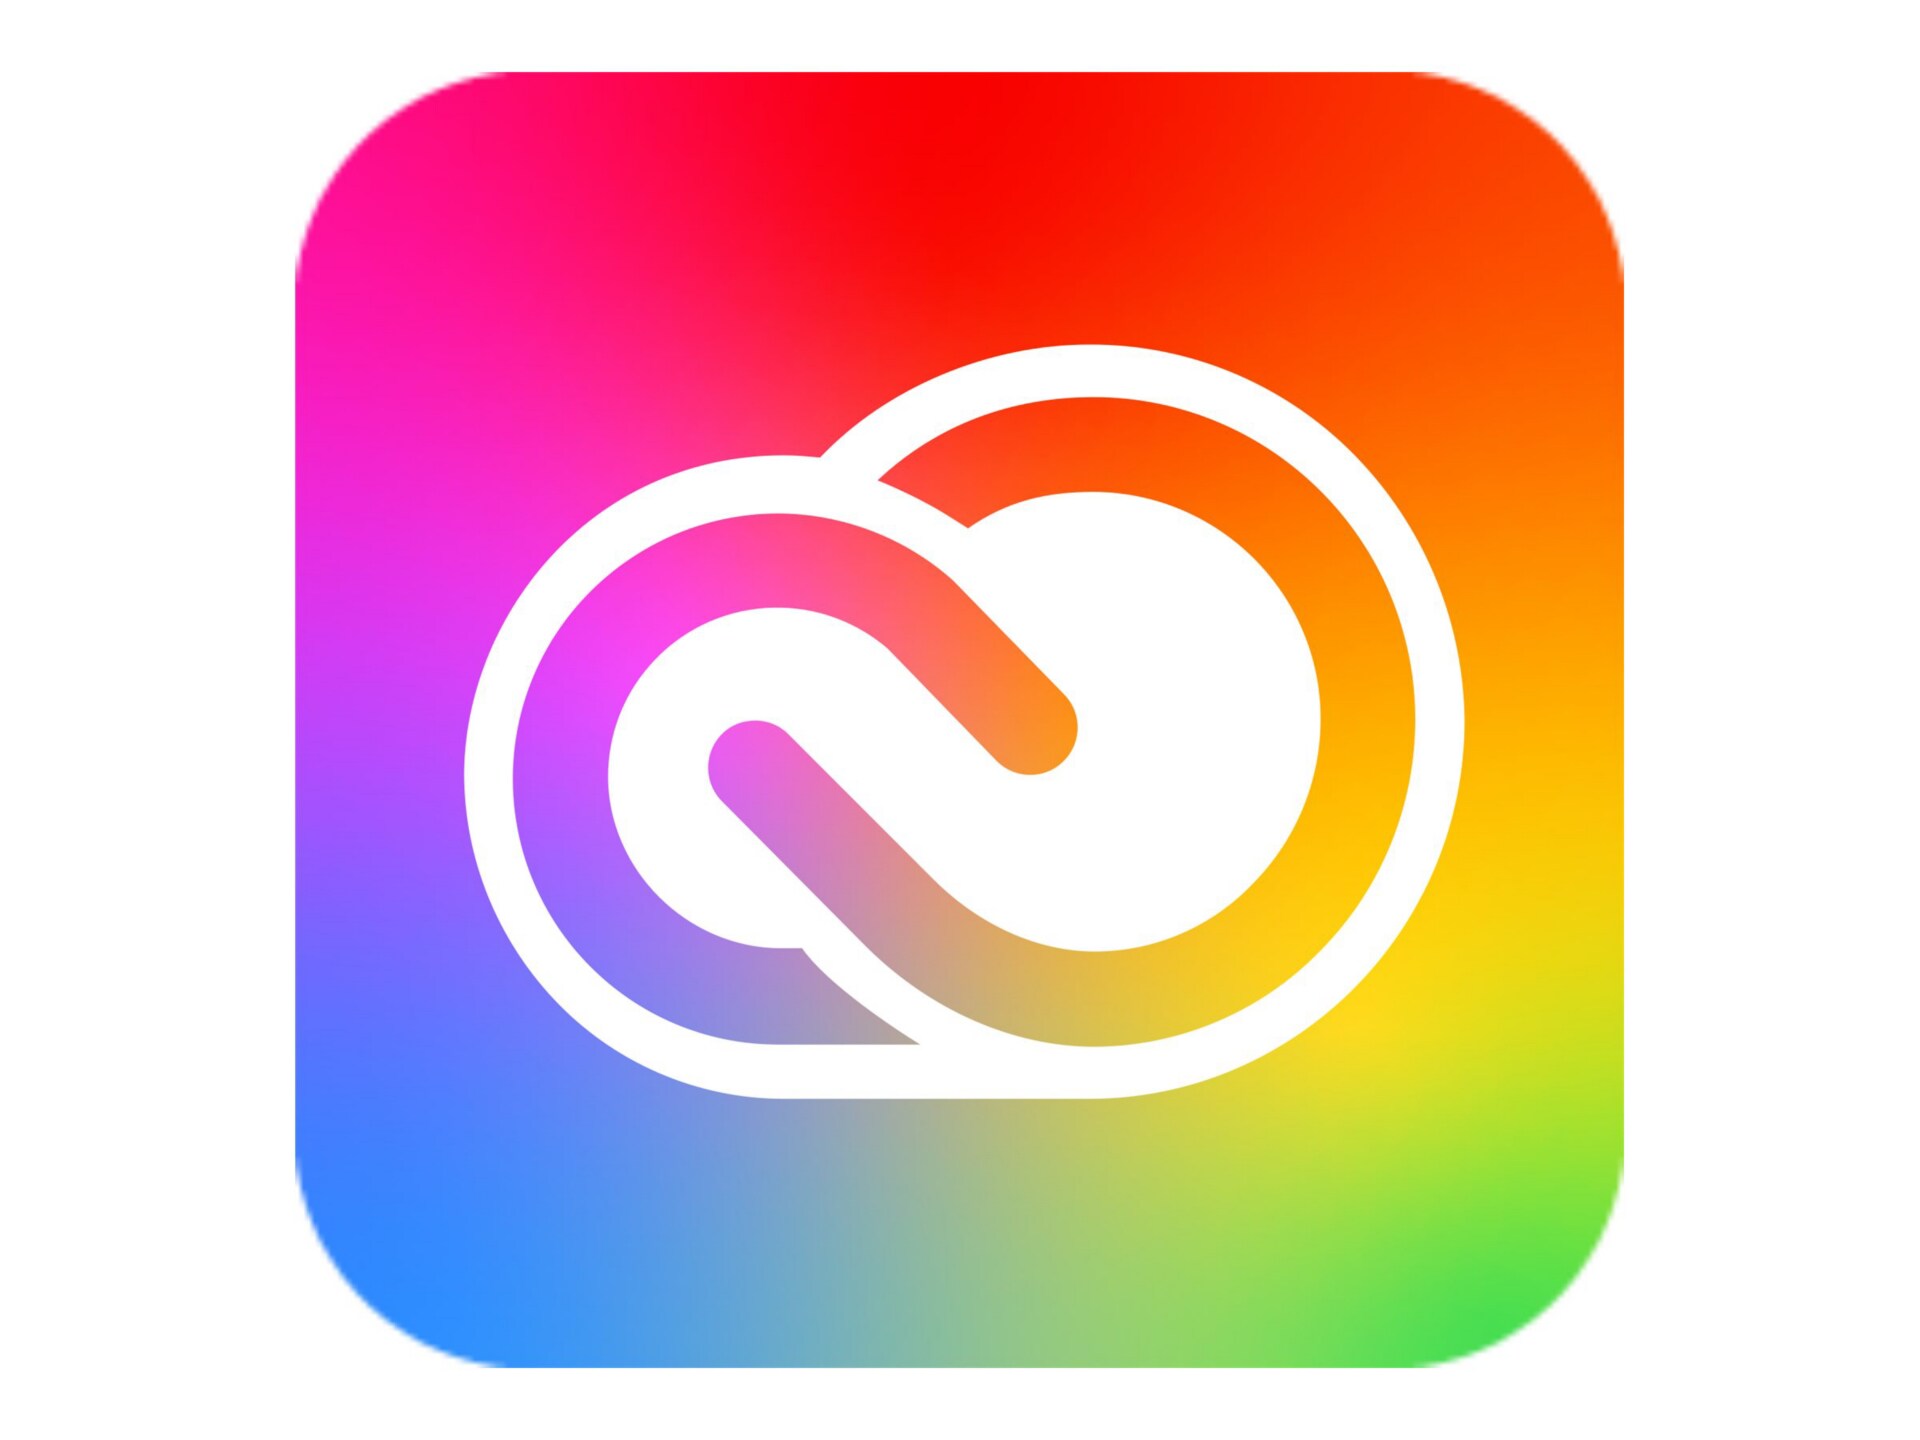 Adobe Creative Cloud for Enterprise - All Apps - Subscription New (32 month